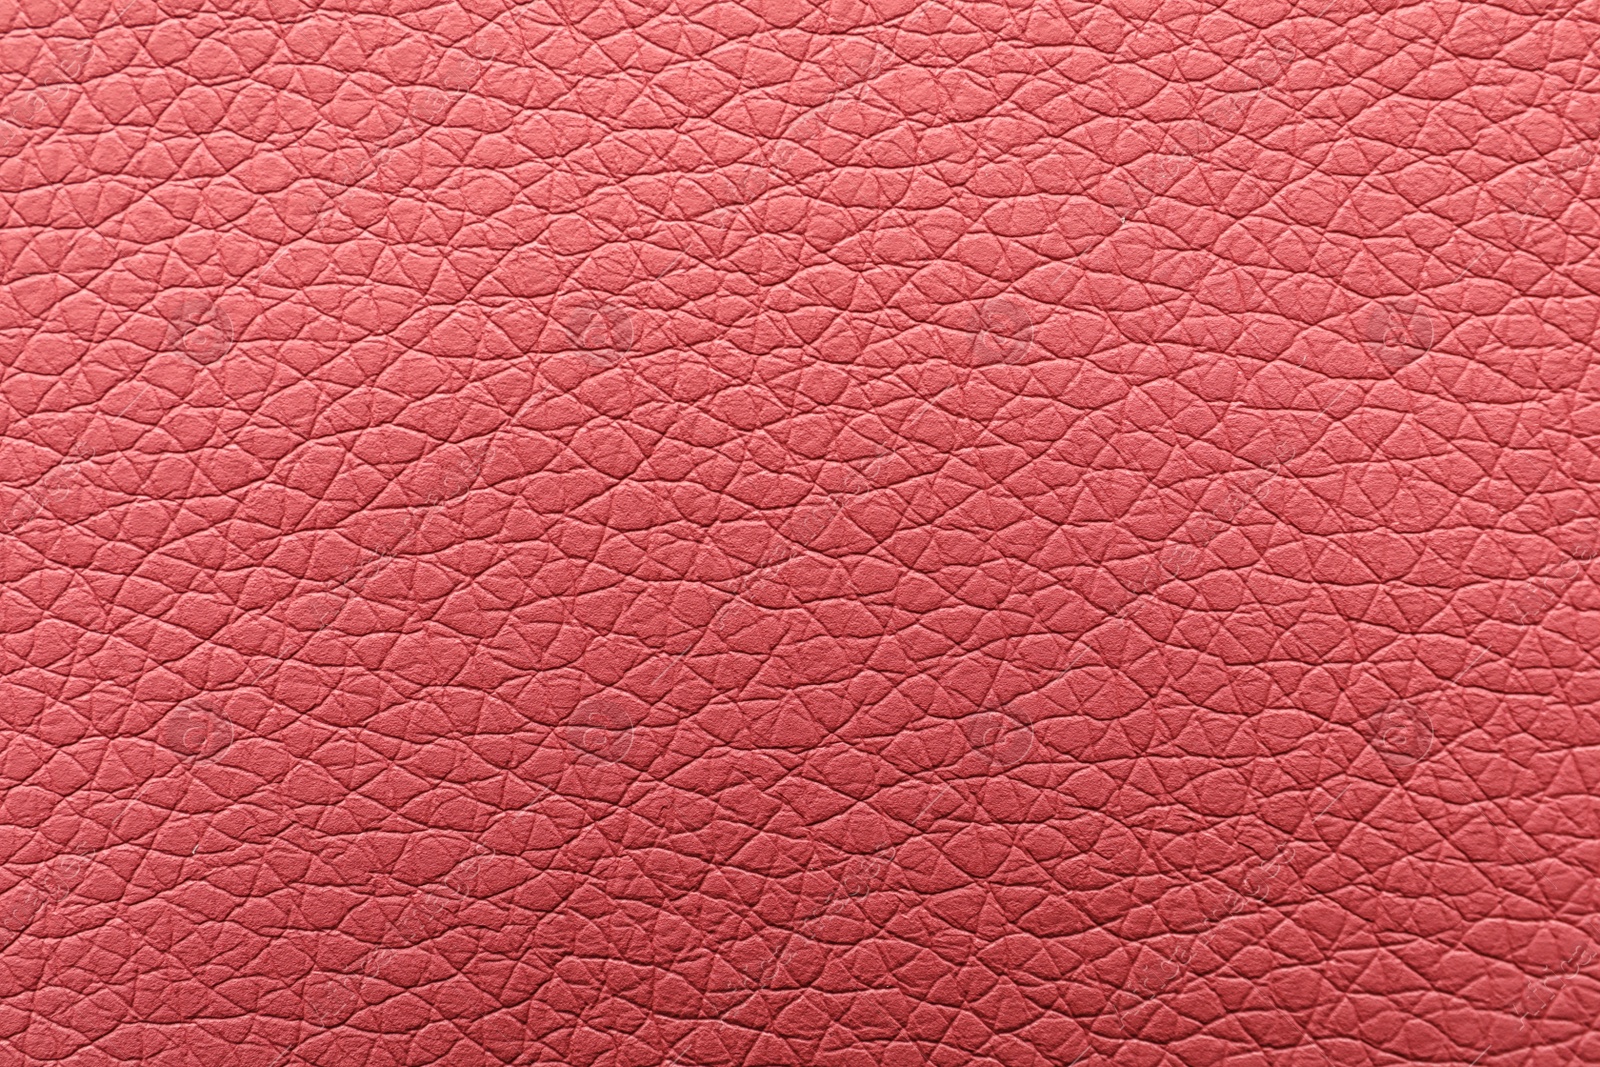 Photo of Texture of pink leather as background, closeup